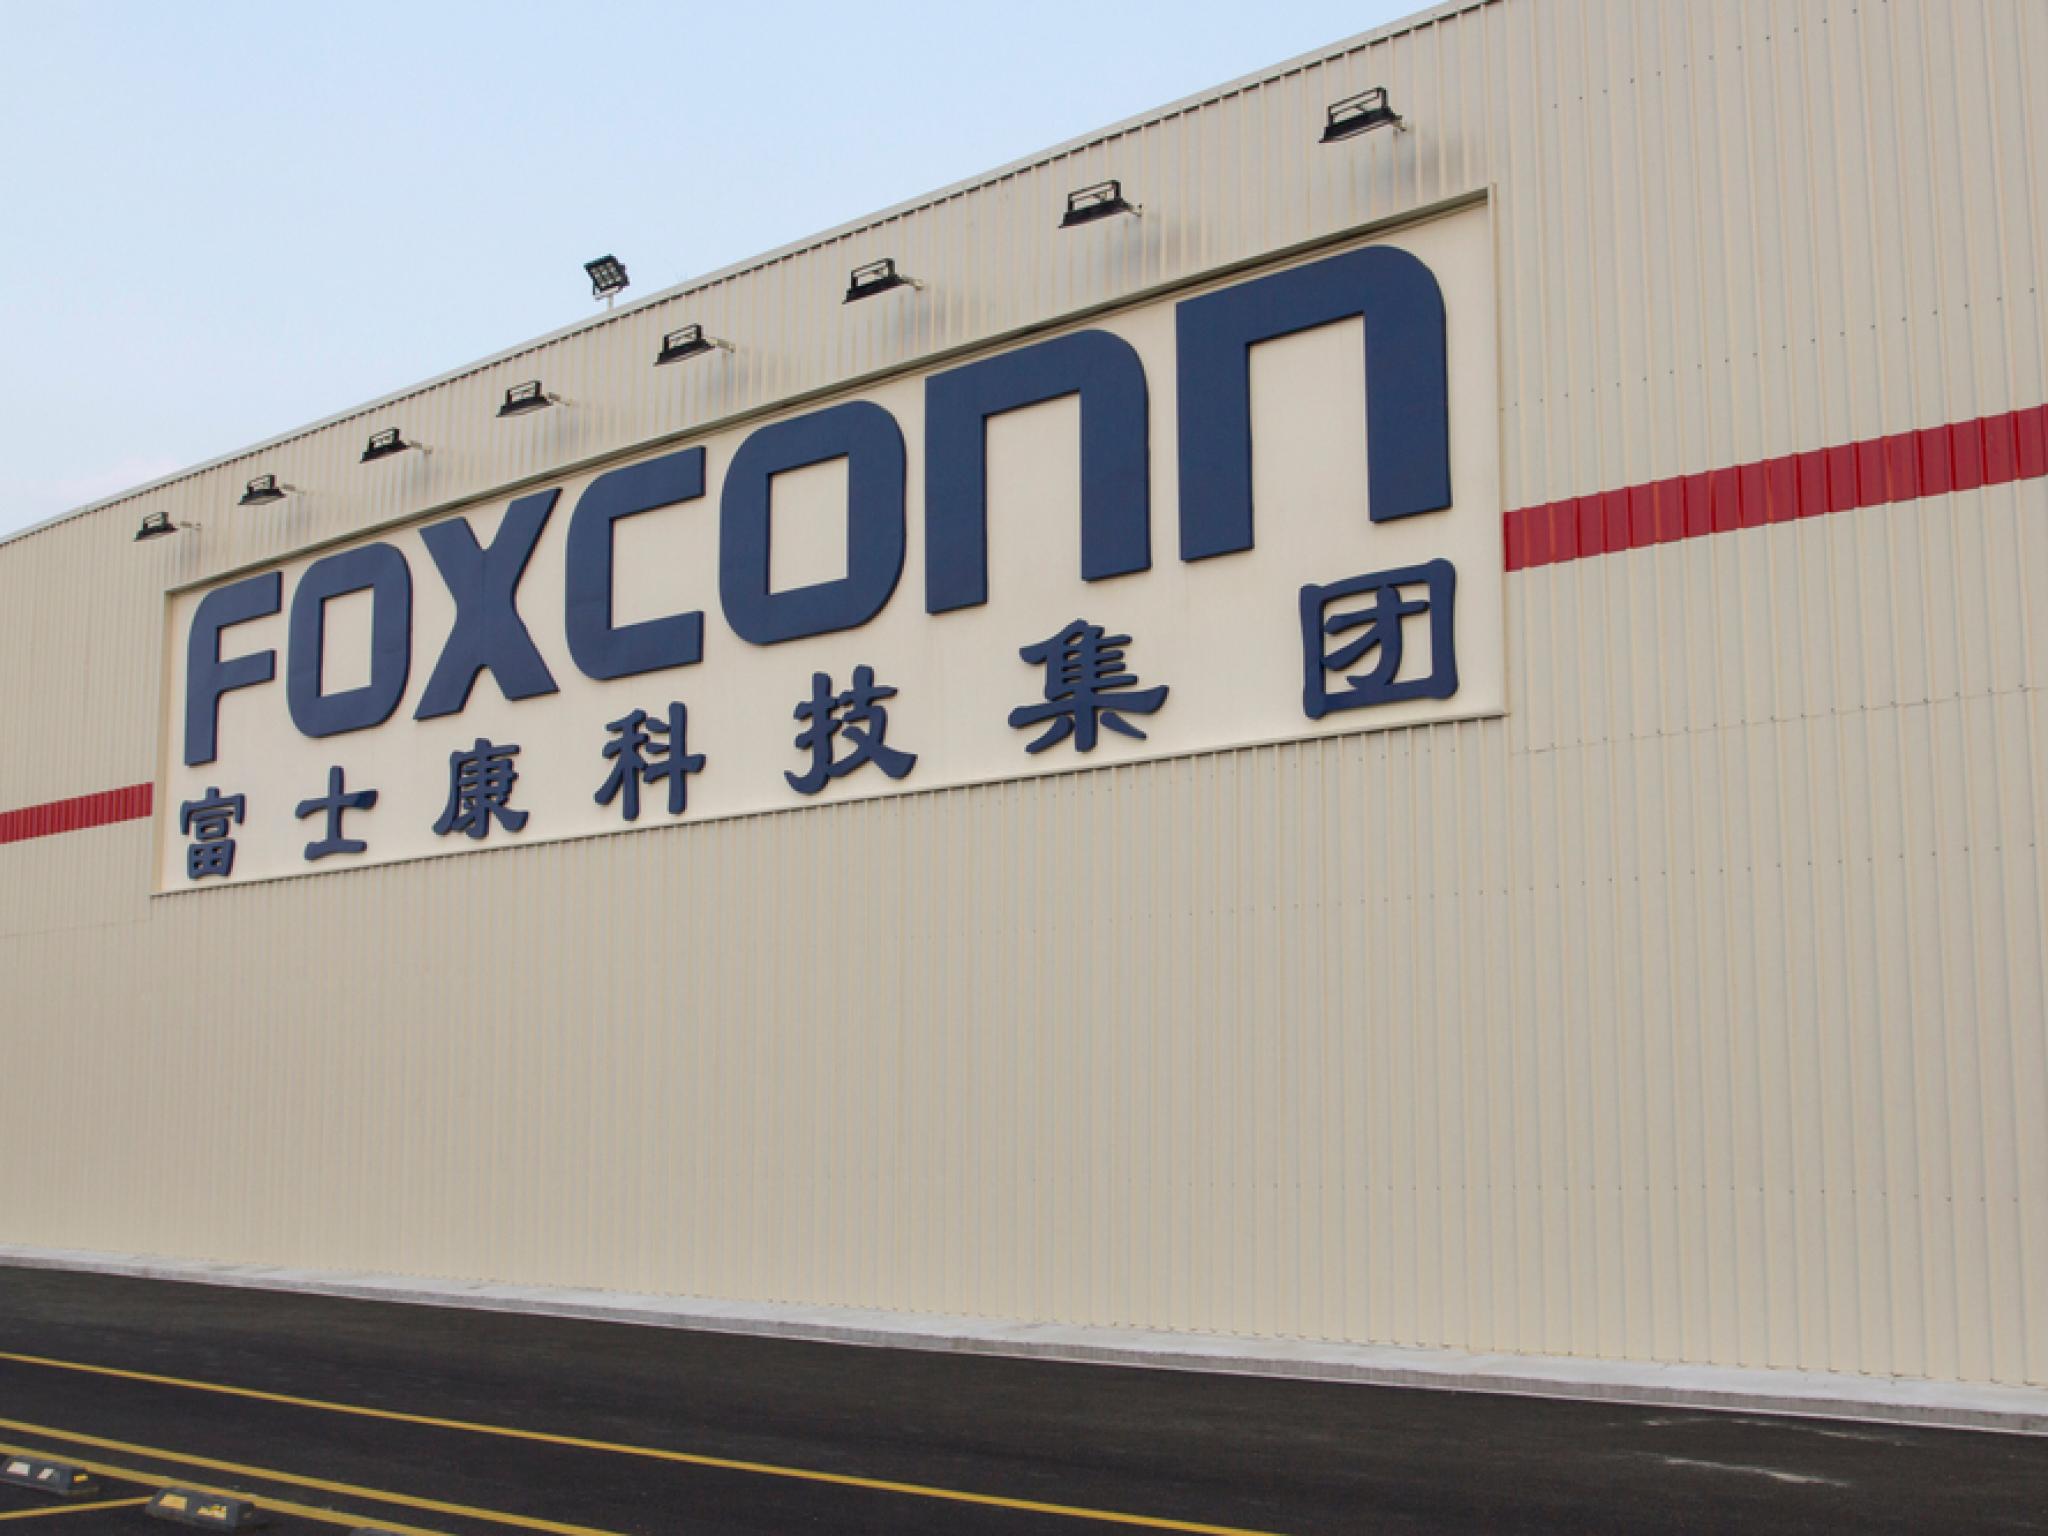  iphone-supplier-foxconn-takes-a-cosmic-leap-diversifies-into-space-with-prototype-satellites 